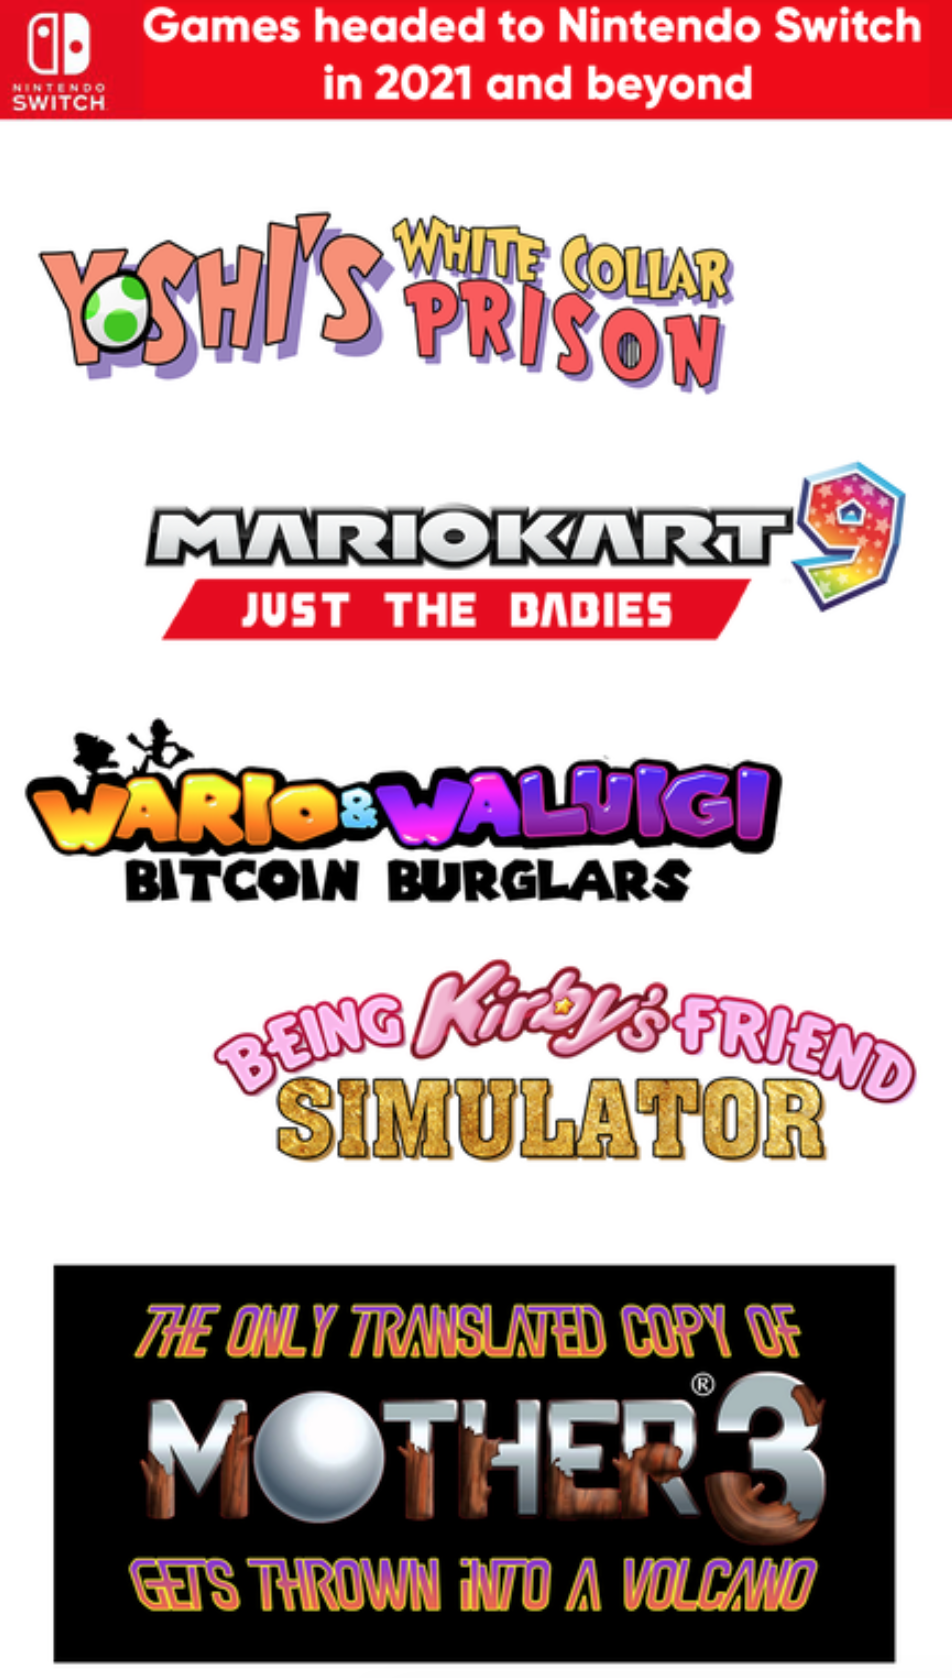 gaming memes - banner - Games headed to Nintendo Switch in 2021 and beyond Switch White Collar sull's Prison Mariokart Just The Dadies Warios Valuigi Bitcoin Burglars Bene KeyB Friend Simulator The Only Translated Cup V MOTHER3 Gets Thrown Into A Volcano